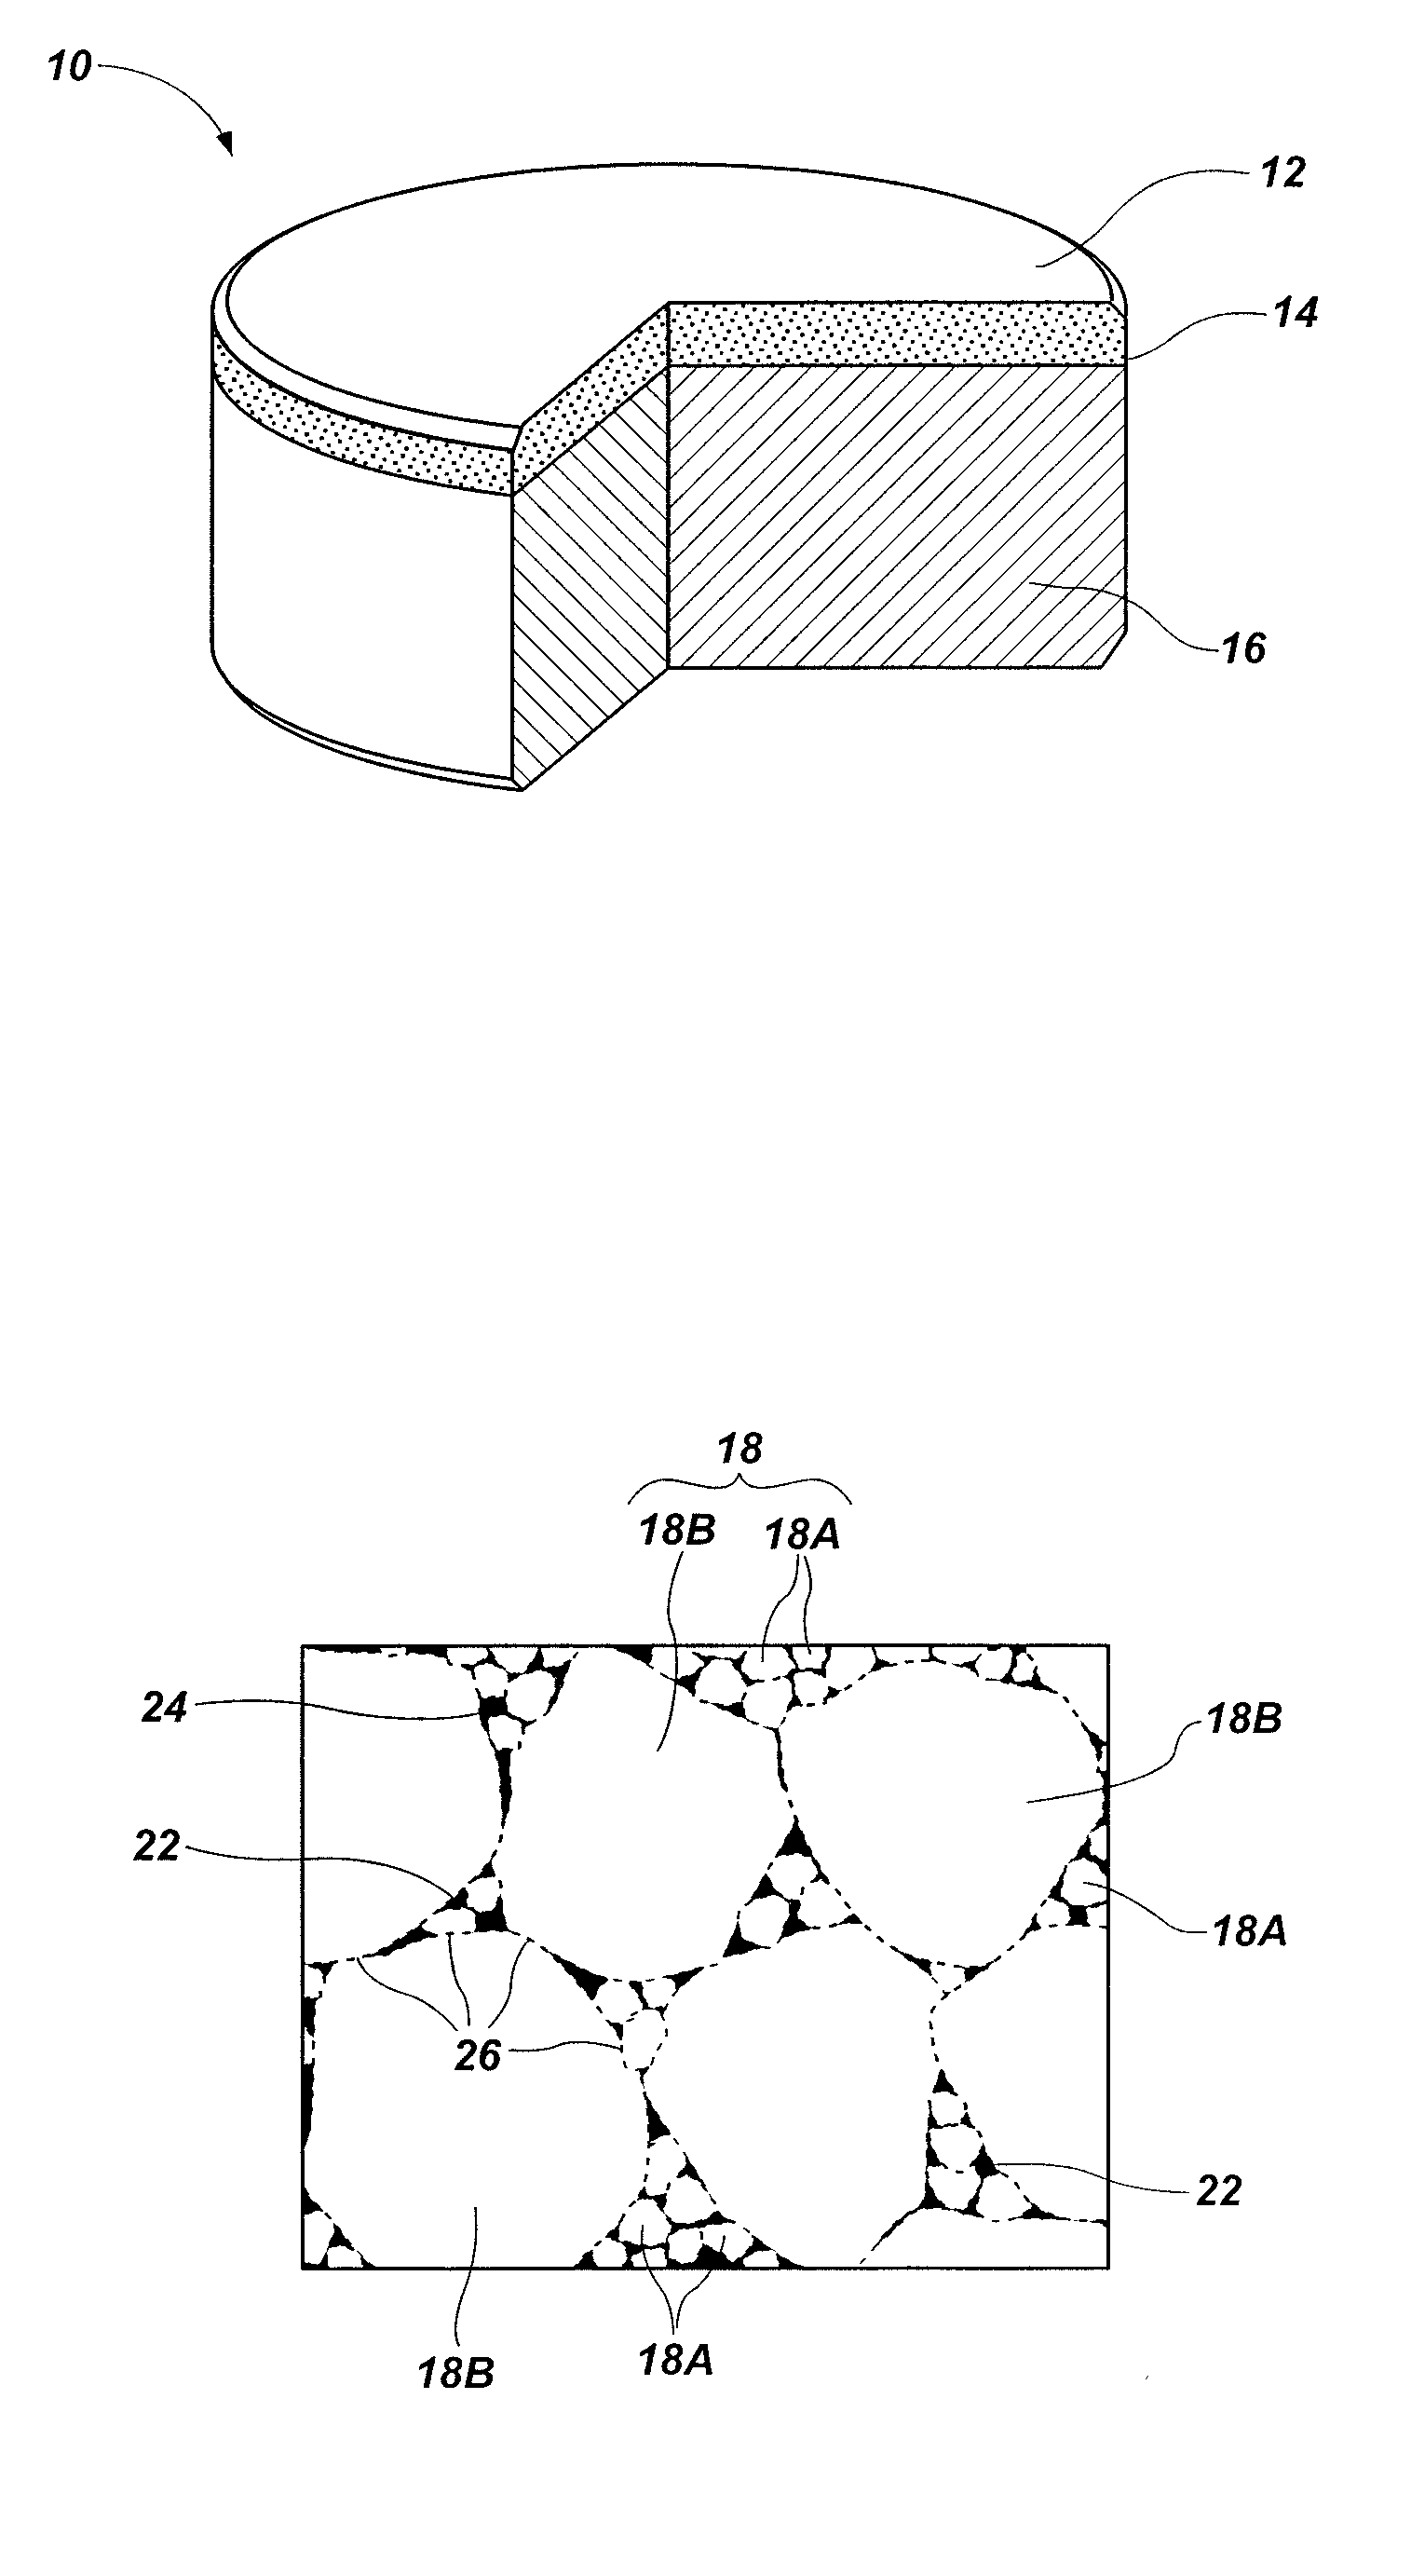 Combined field assisted sintering techniques and hthp sintering techniques for forming polycrystalline diamond compacts and earth-boring tools, and sintering systems for performing such methods